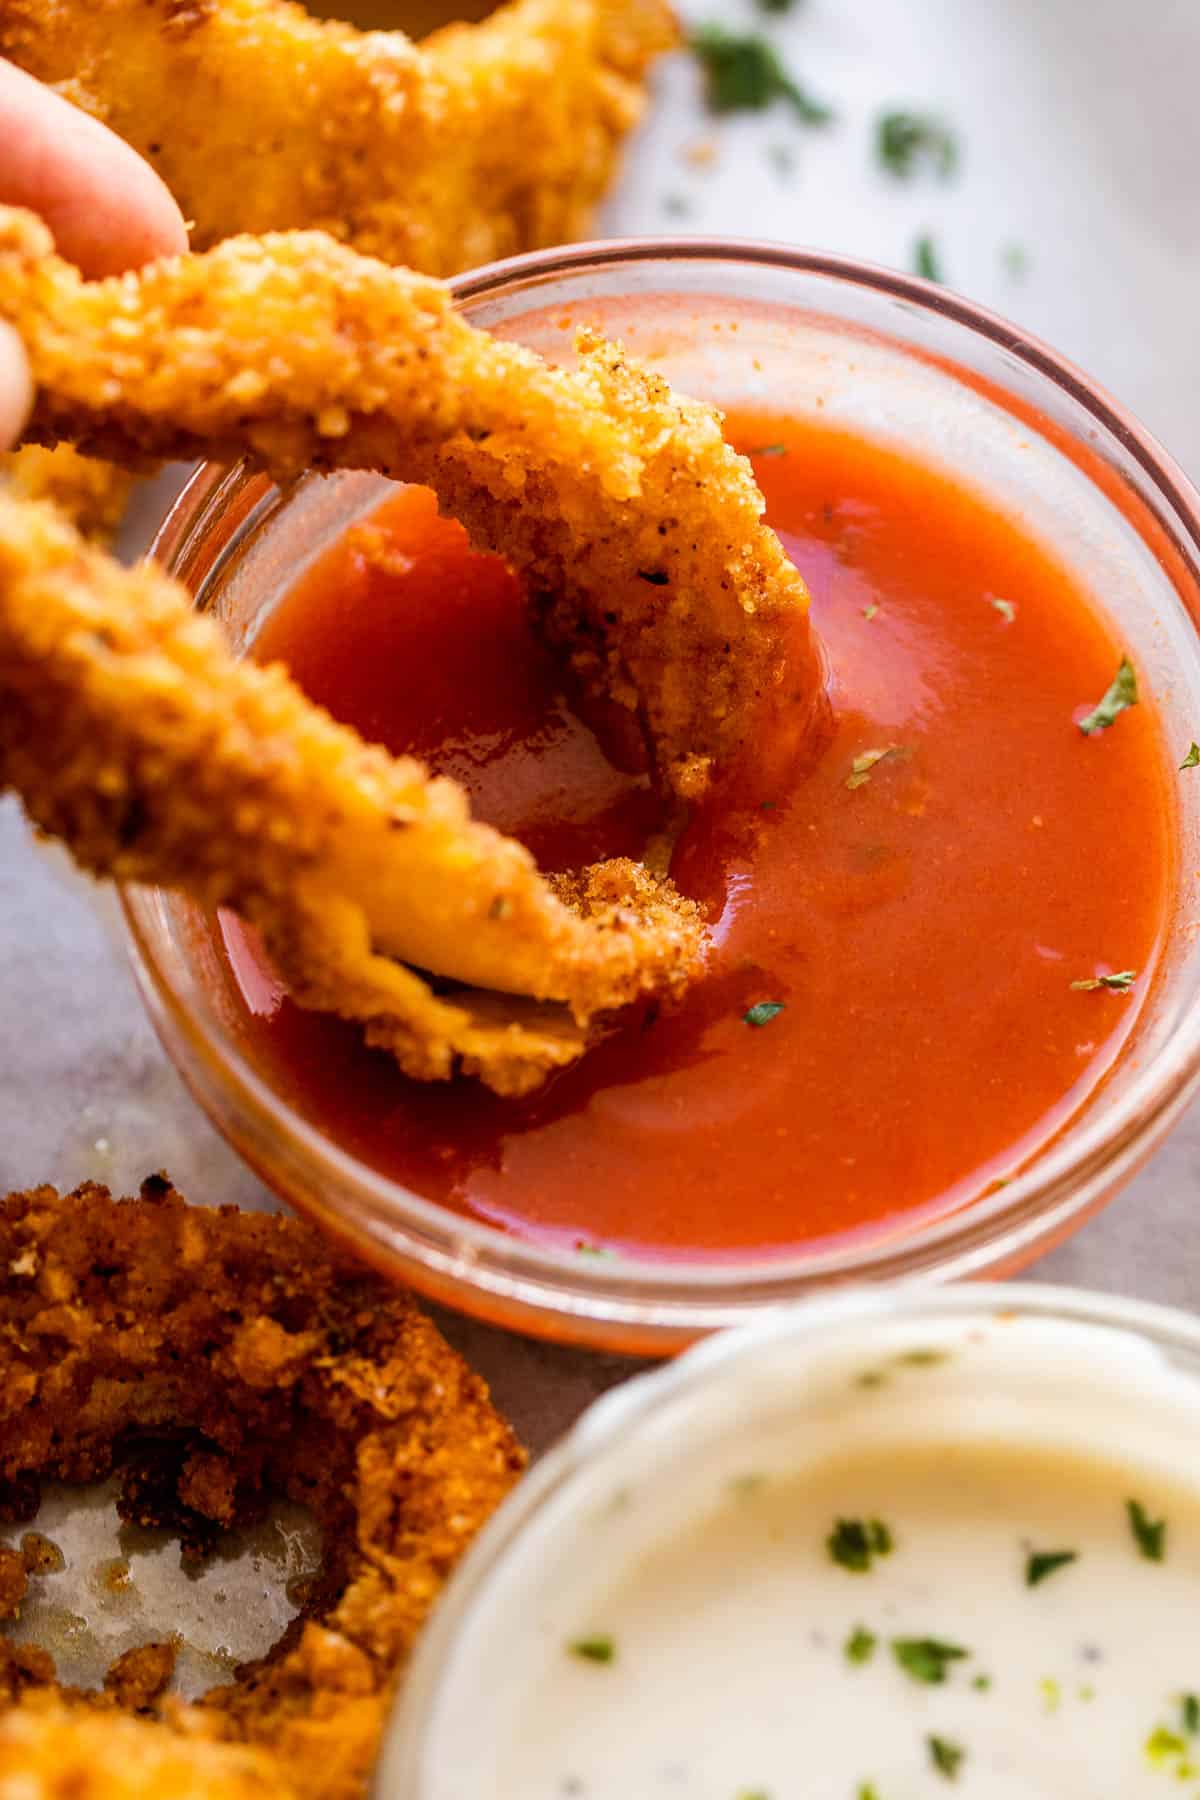 Dipping a homemade onion ring in barbecue sauce.